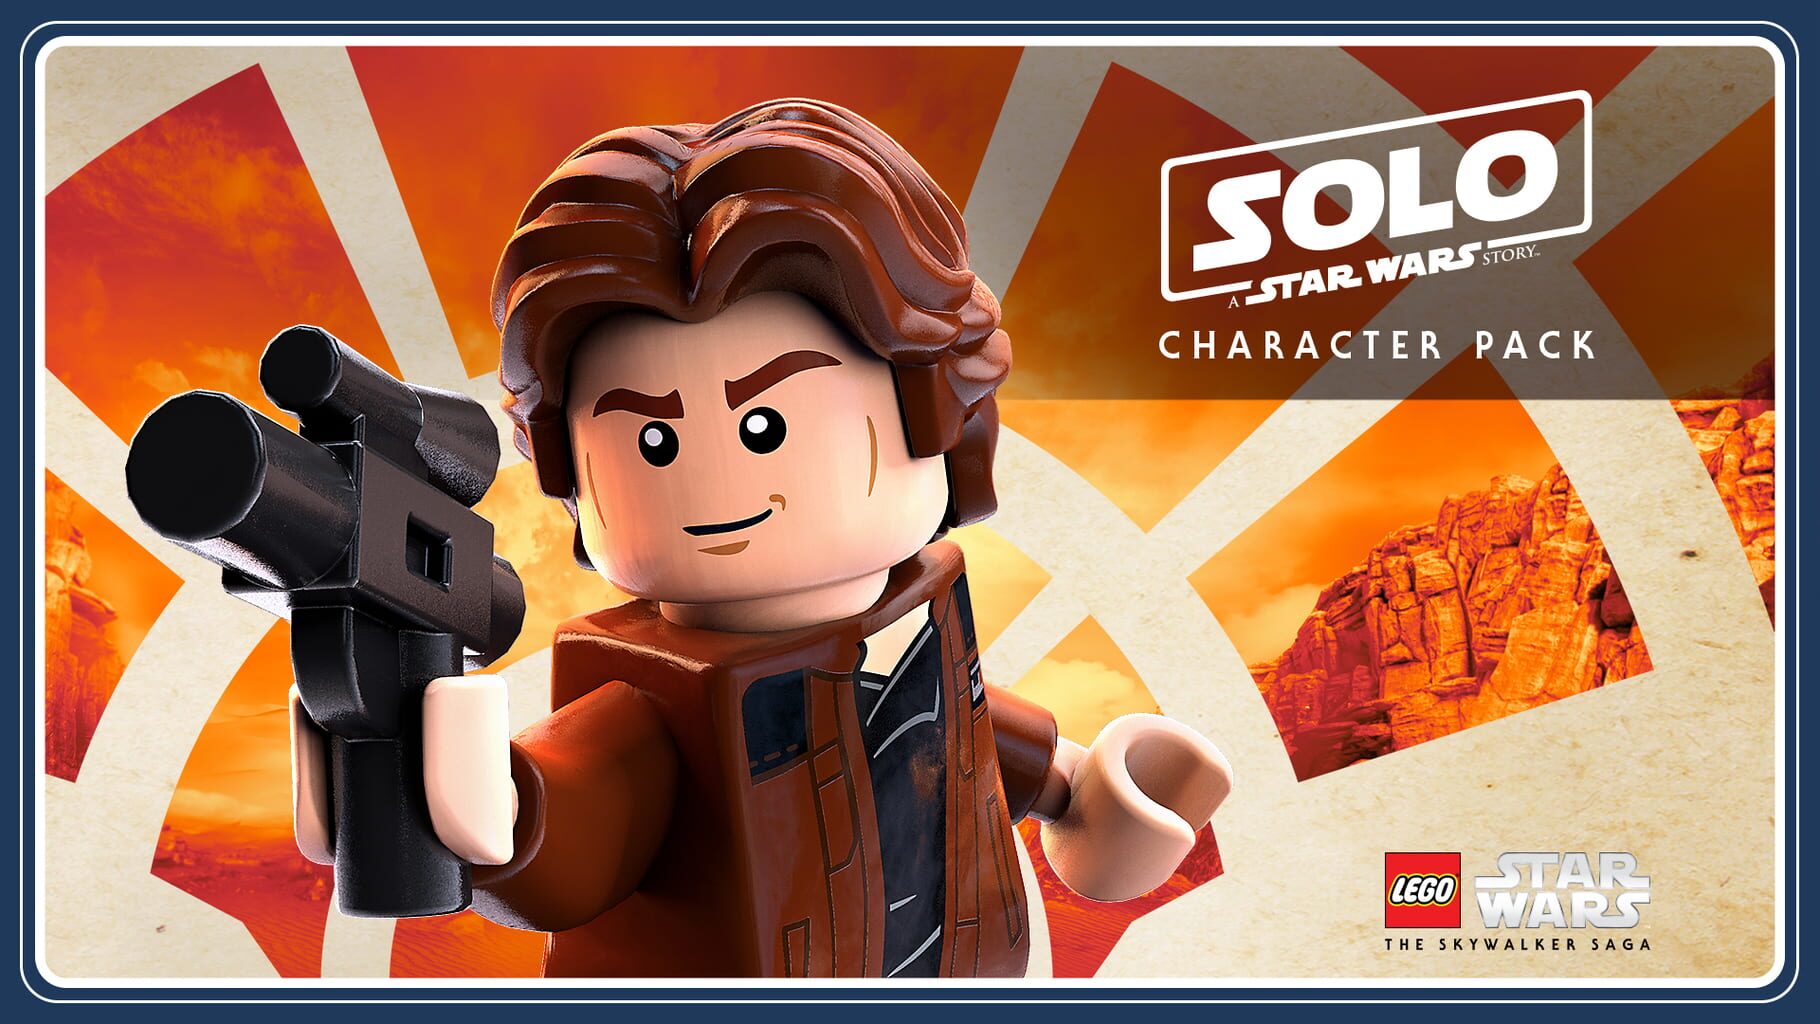 Arte - LEGO Star Wars: The Skywalker Saga - Solo: A Star Wars Story - Character Pack